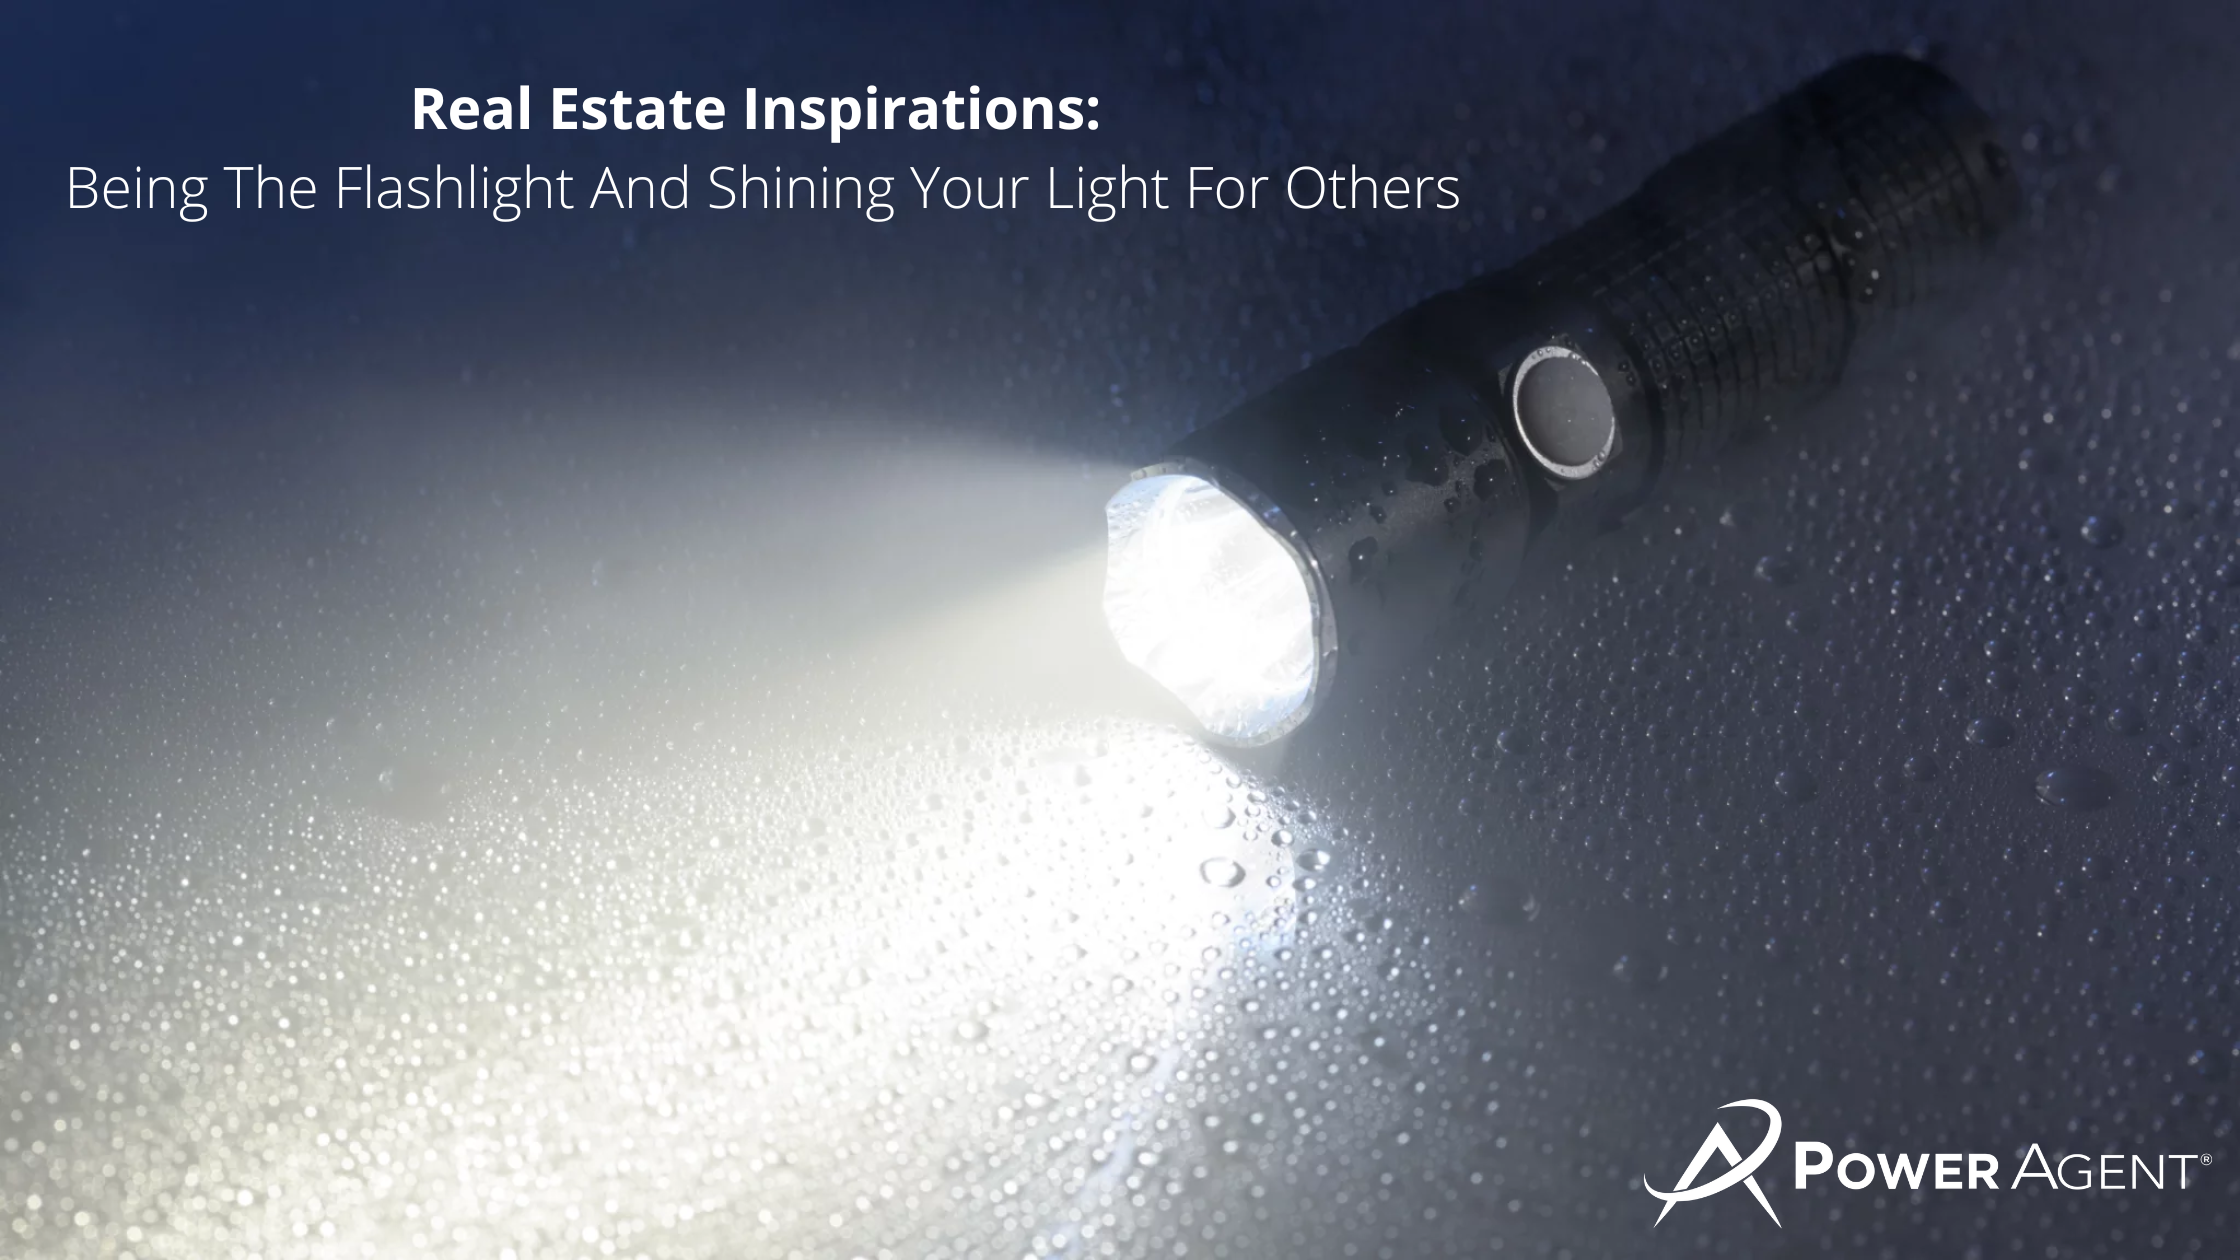 Real Estate Inspirations: Being The Flashlight And Shining Your Light For Others